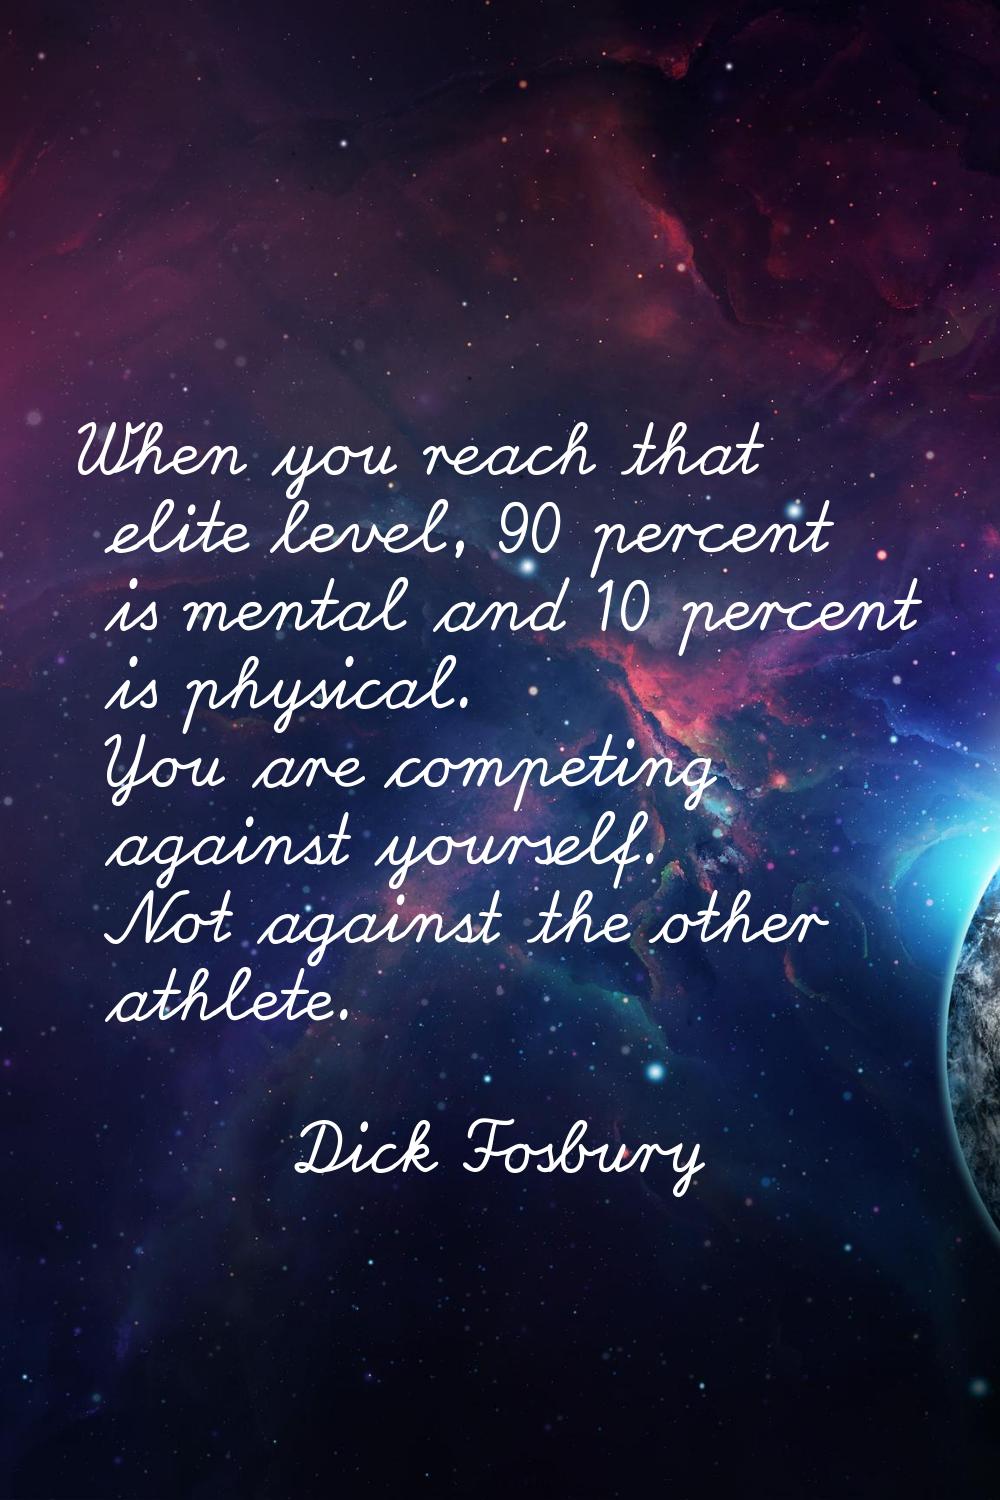 When you reach that elite level, 90 percent is mental and 10 percent is physical. You are competing